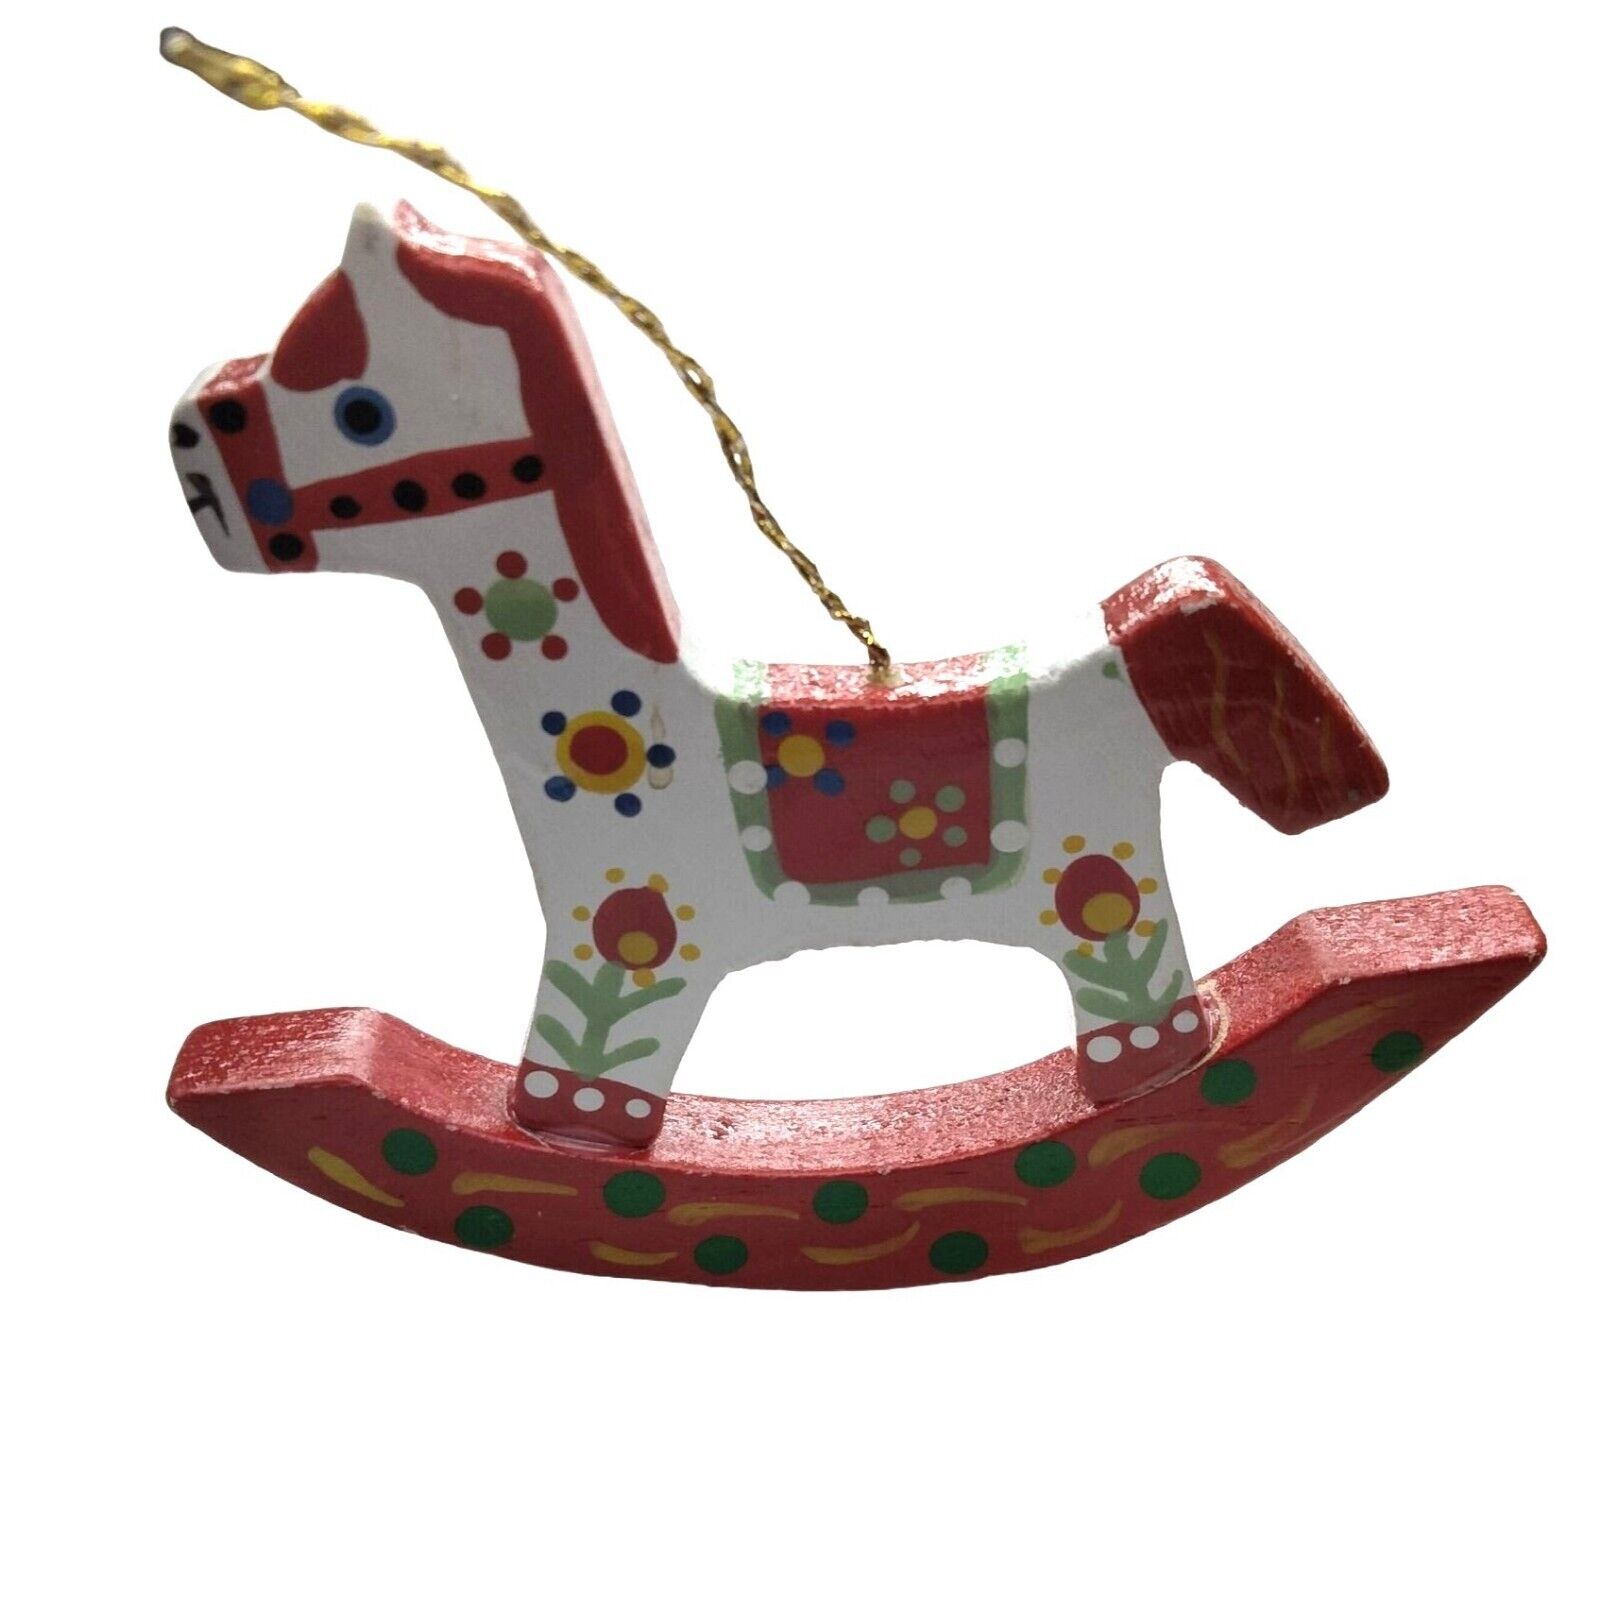 Rocking Horse Christmas Ornament Wood Tolle Pennsylvania Dutch Hand Painted